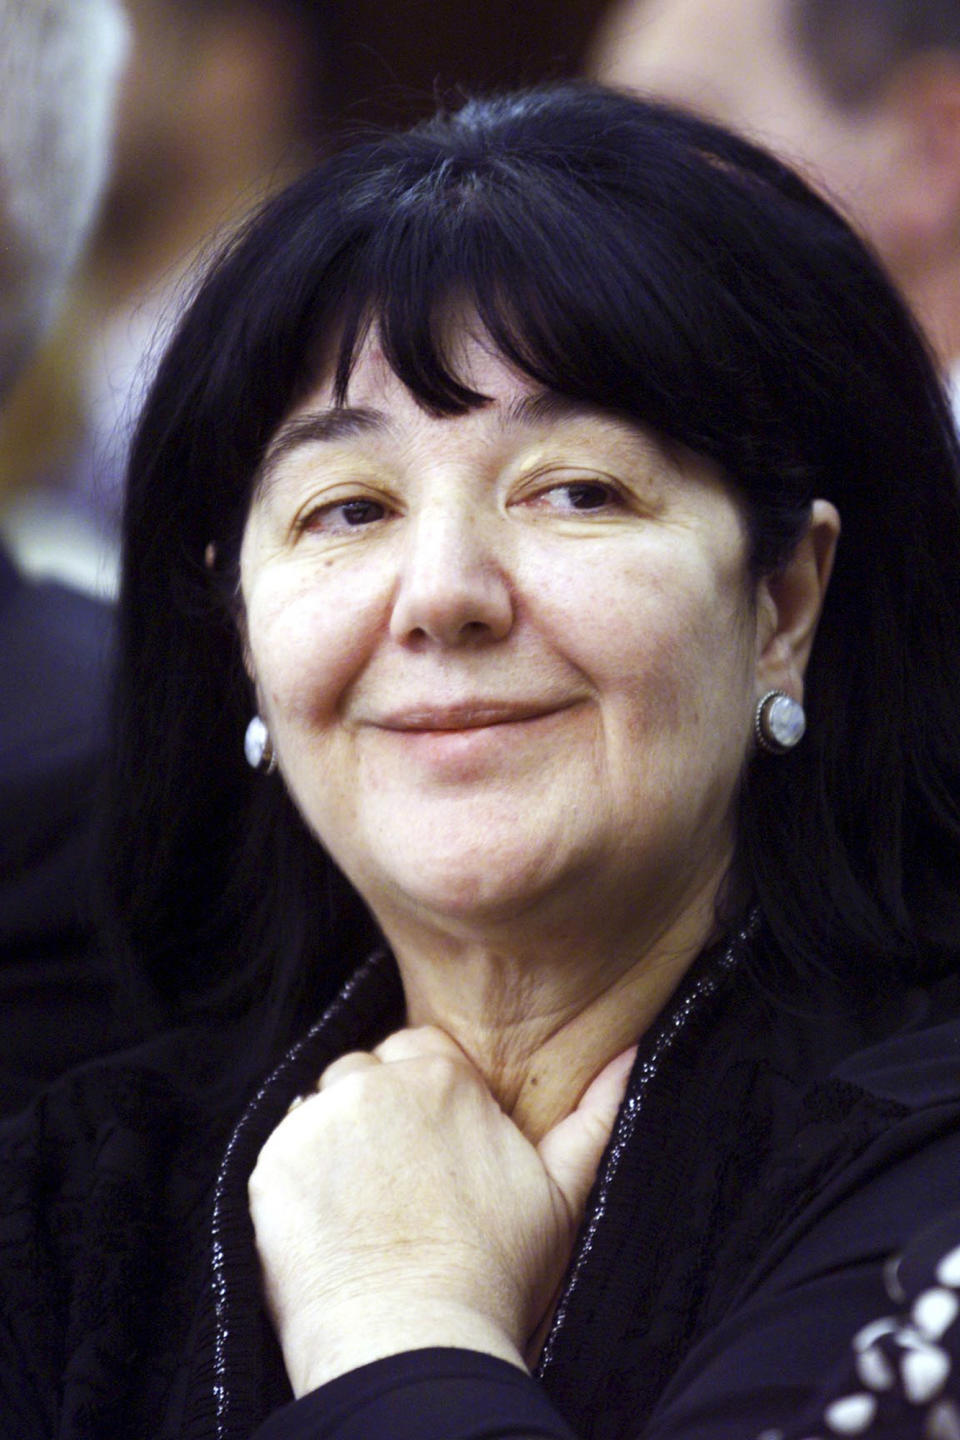 In this Nov. 28, 2000 file photo, Mirjana Markovic, the leader of the Yugoslav Left Alliance and the wife of former Yugoslav President Slobodan Milosevic, at the federal parliament session in Belgrade. Serbia's state television says that Mirjana Markovic, the widow of former strongman Slobodan Milosevic, has died in Russia. She was 76, it was reported on Sunday, April 14, 2019. (AP Photo/Darko Vojinovic, File)